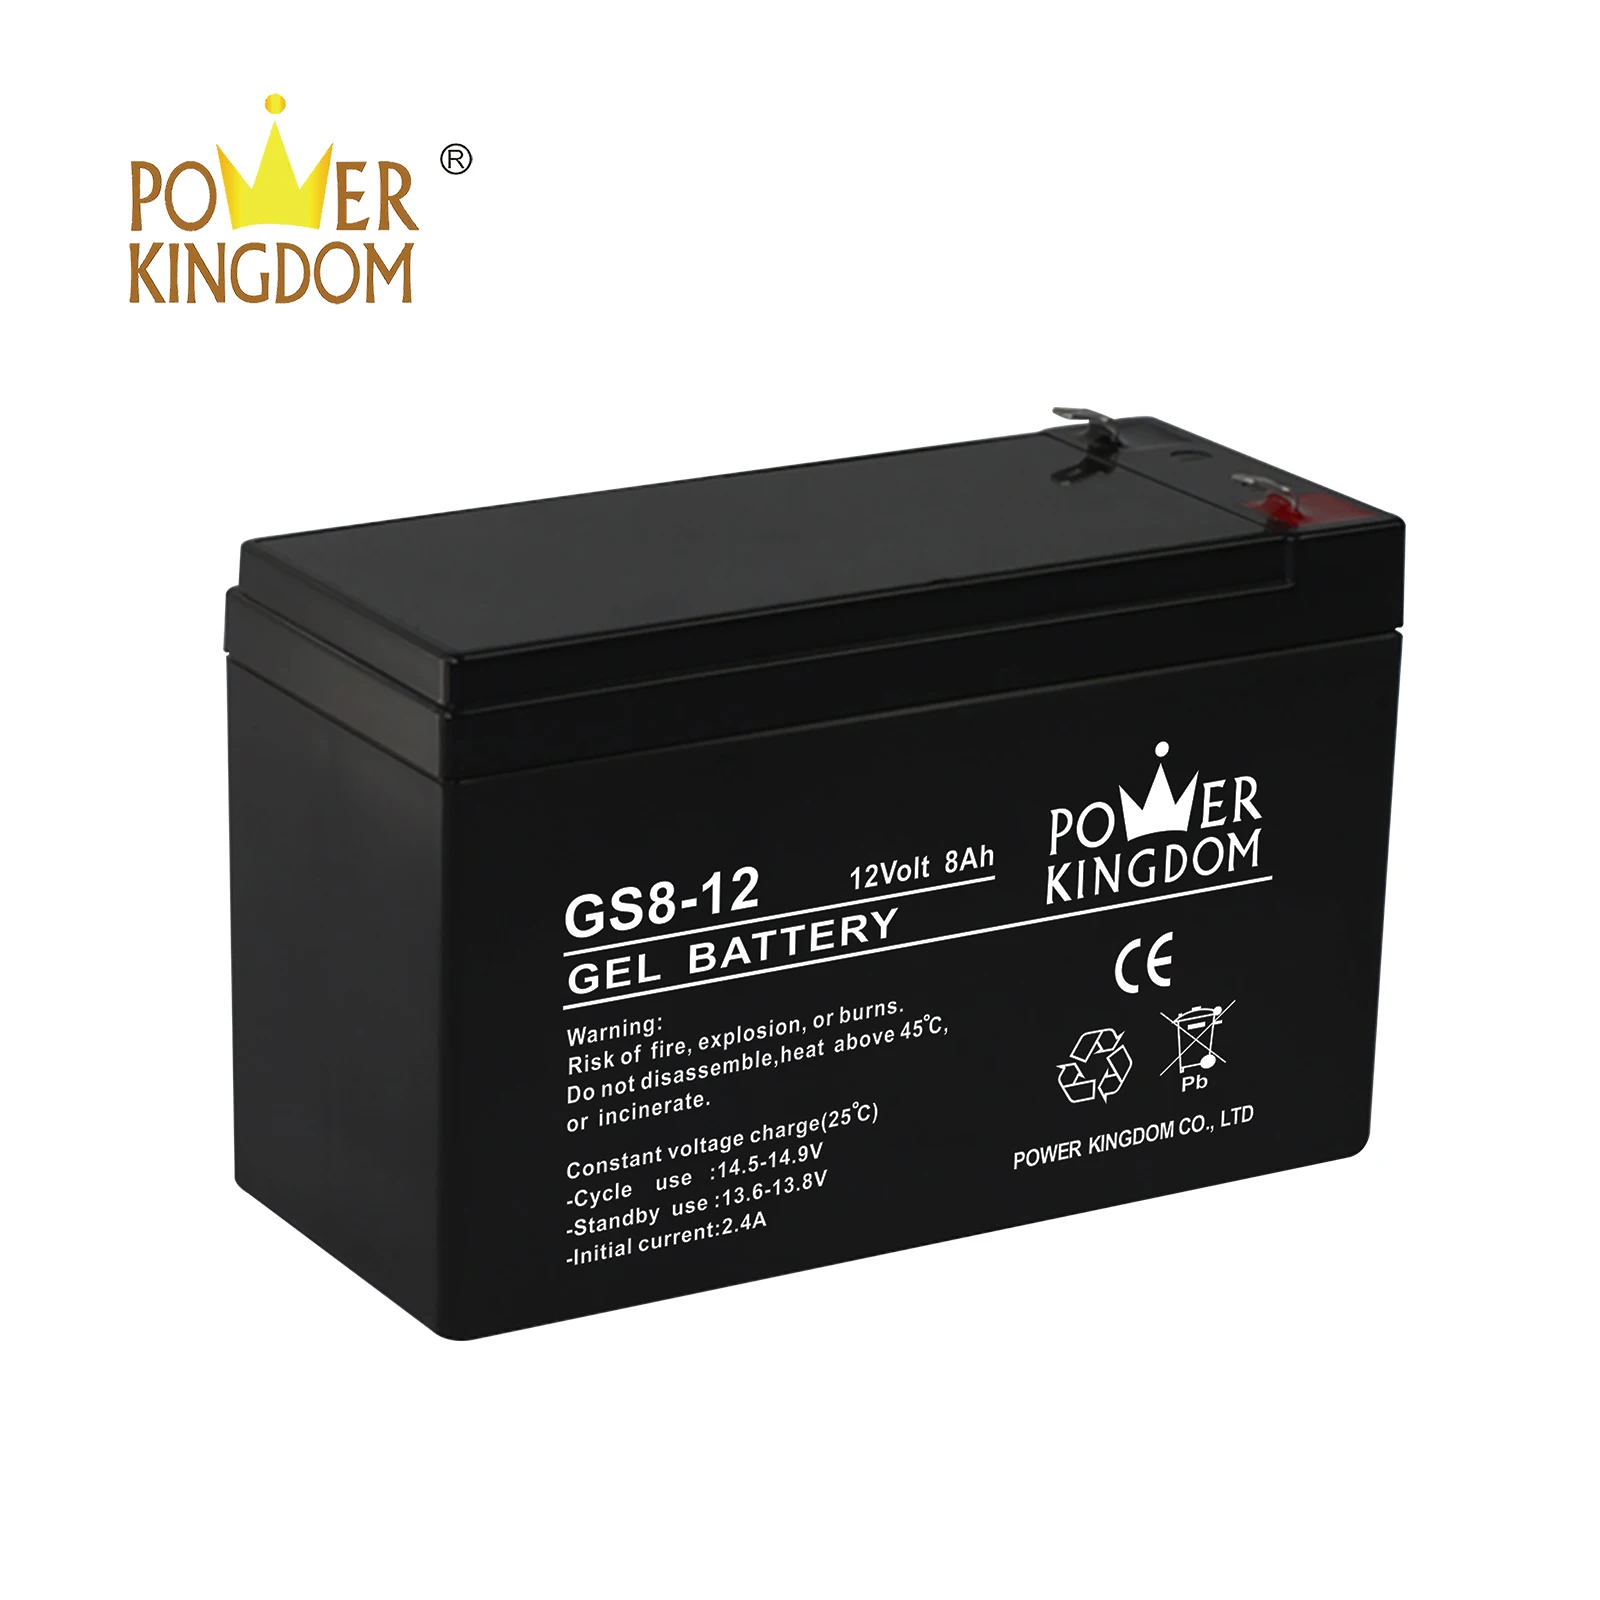 Power Kingdom sealed lead calcium battery Suppliers medical equipment